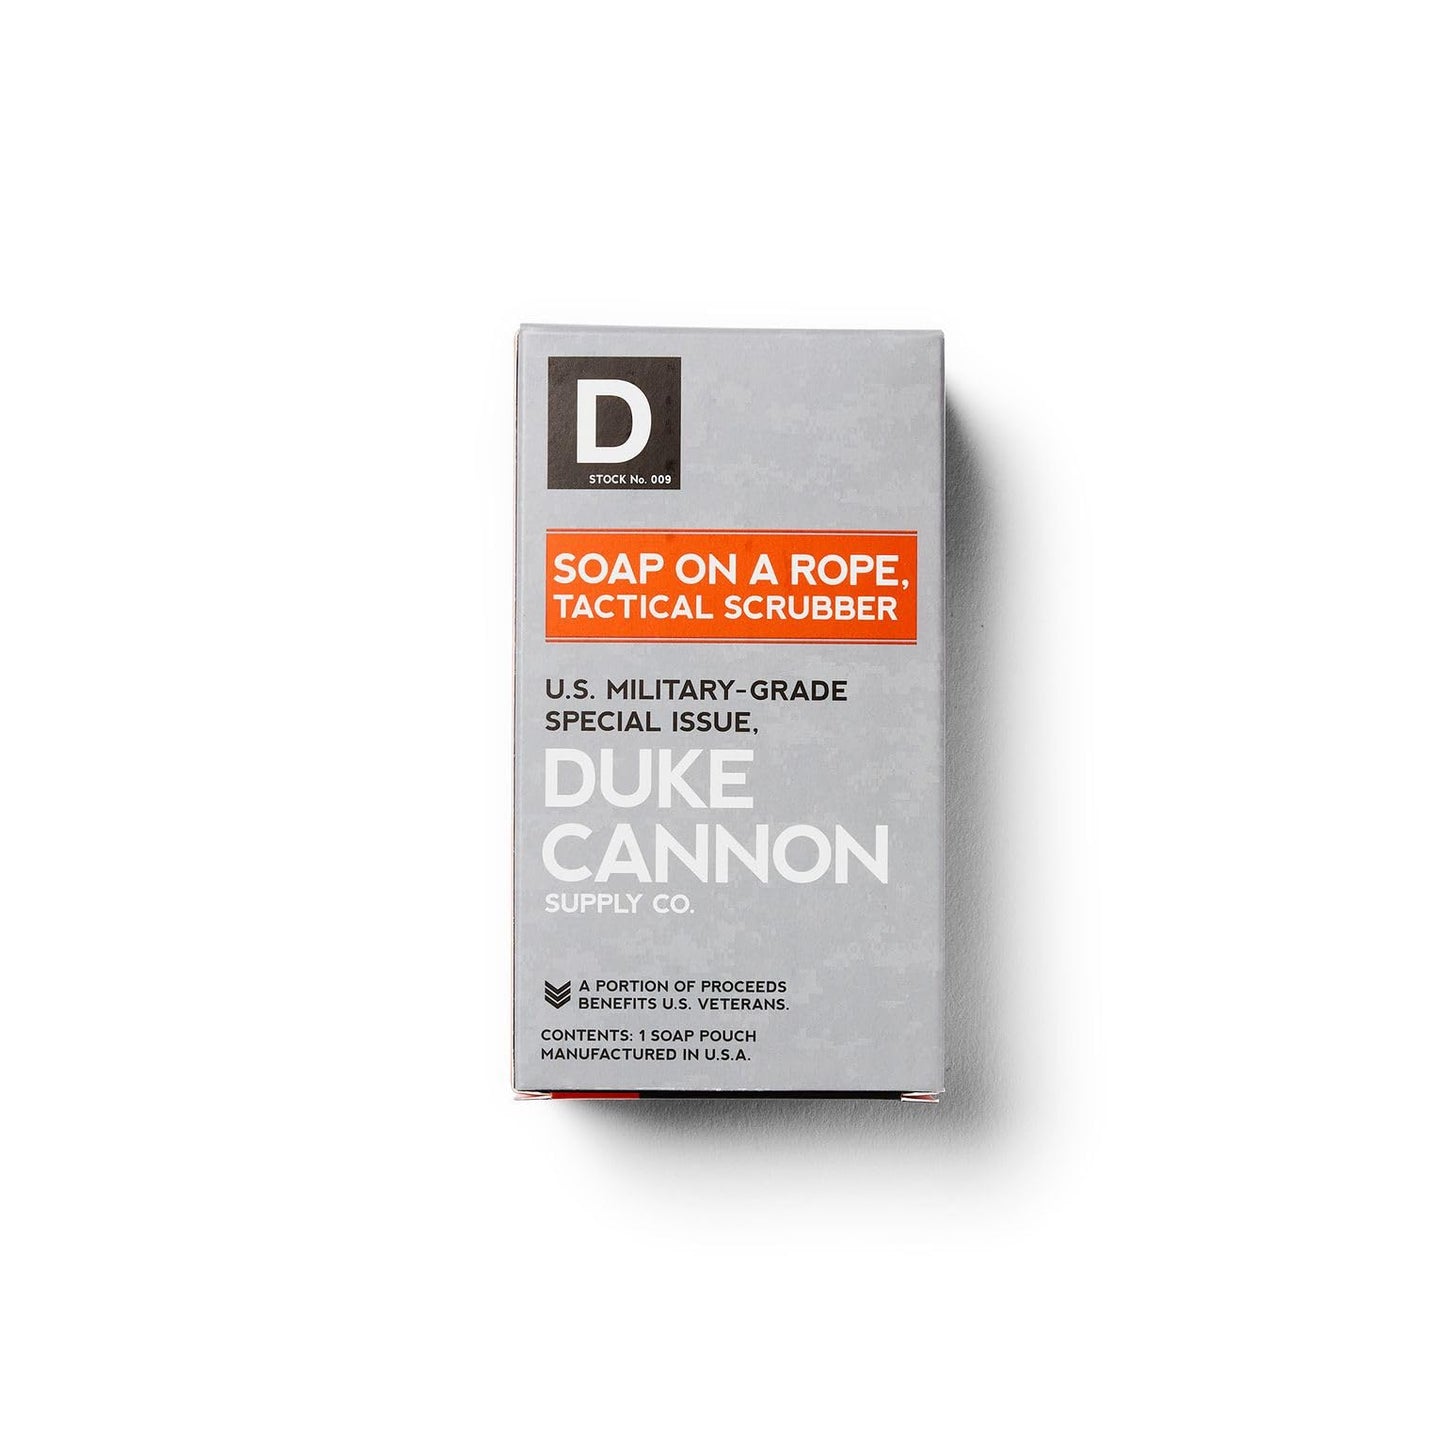 Duke Cannon Tactical Scrubber Soap Pouch - U.S. Military-Grade, Coarse and Soft Mesh, 550 Paracord, Shower Hygiene Essential for Men's Bar Soap